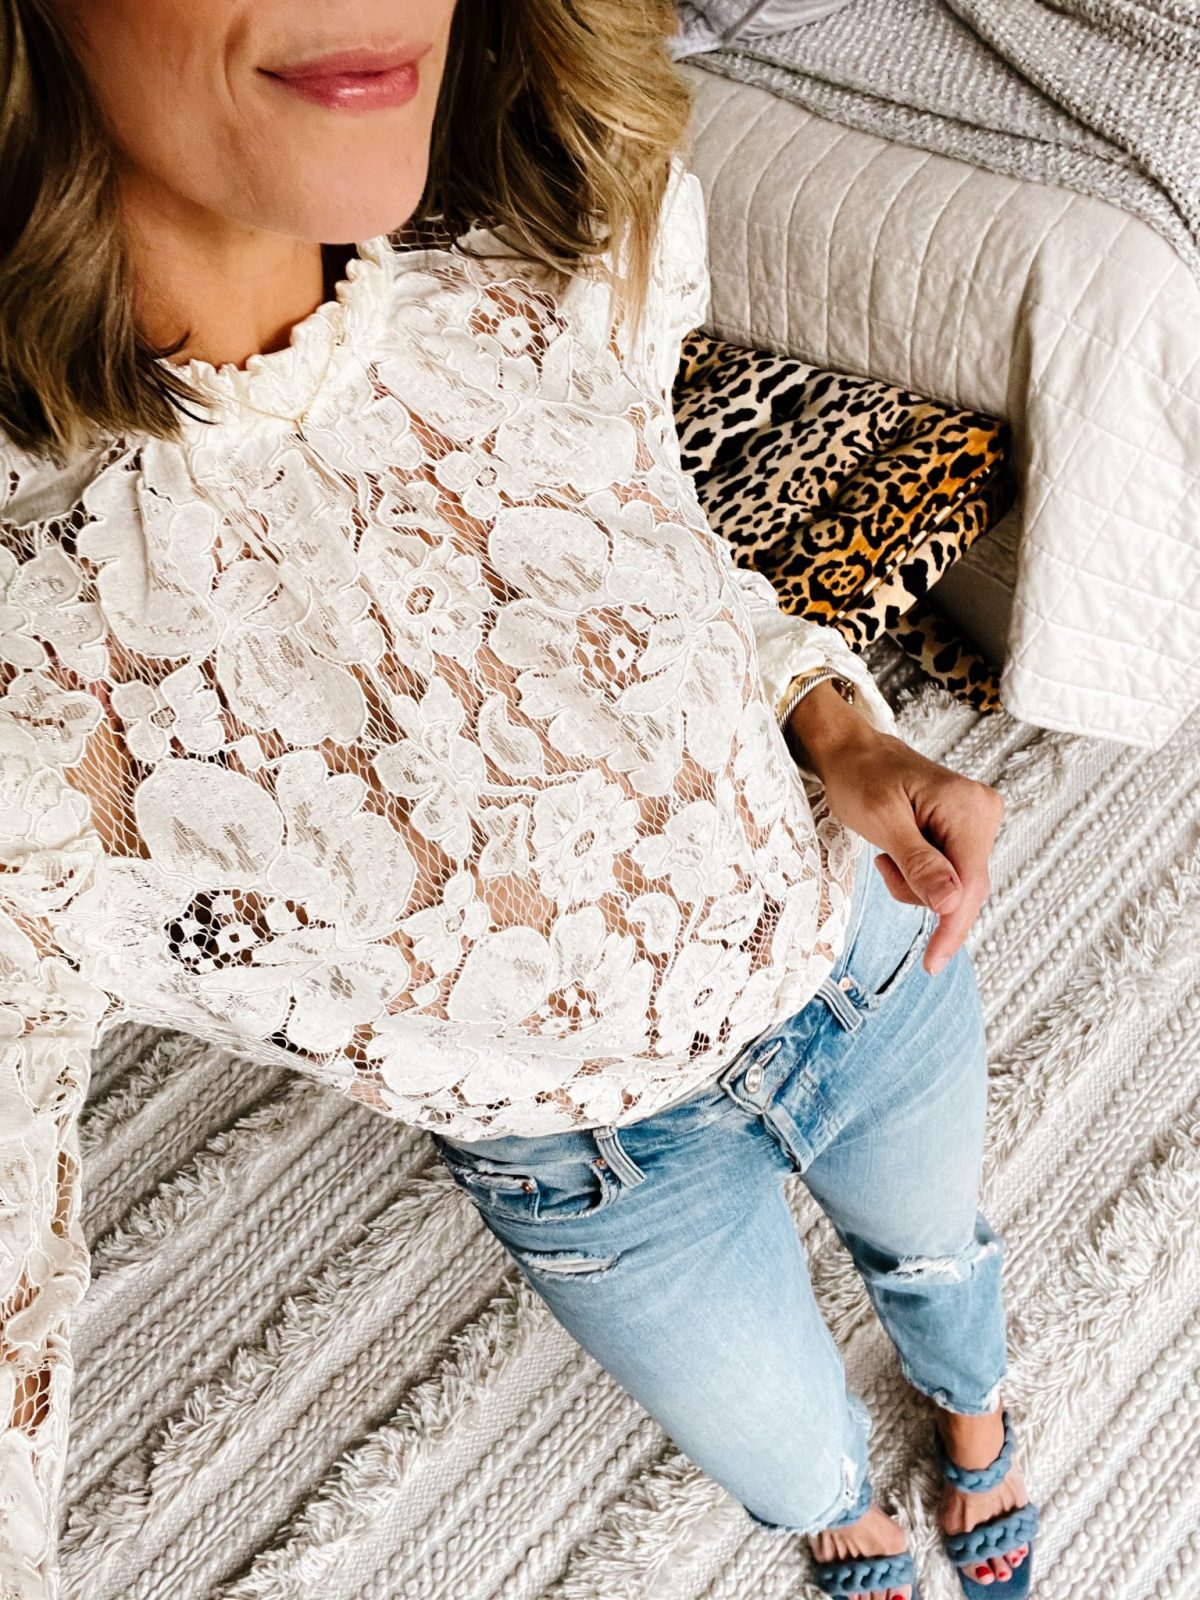 Suzanne wearing a white lace top and denim jeans